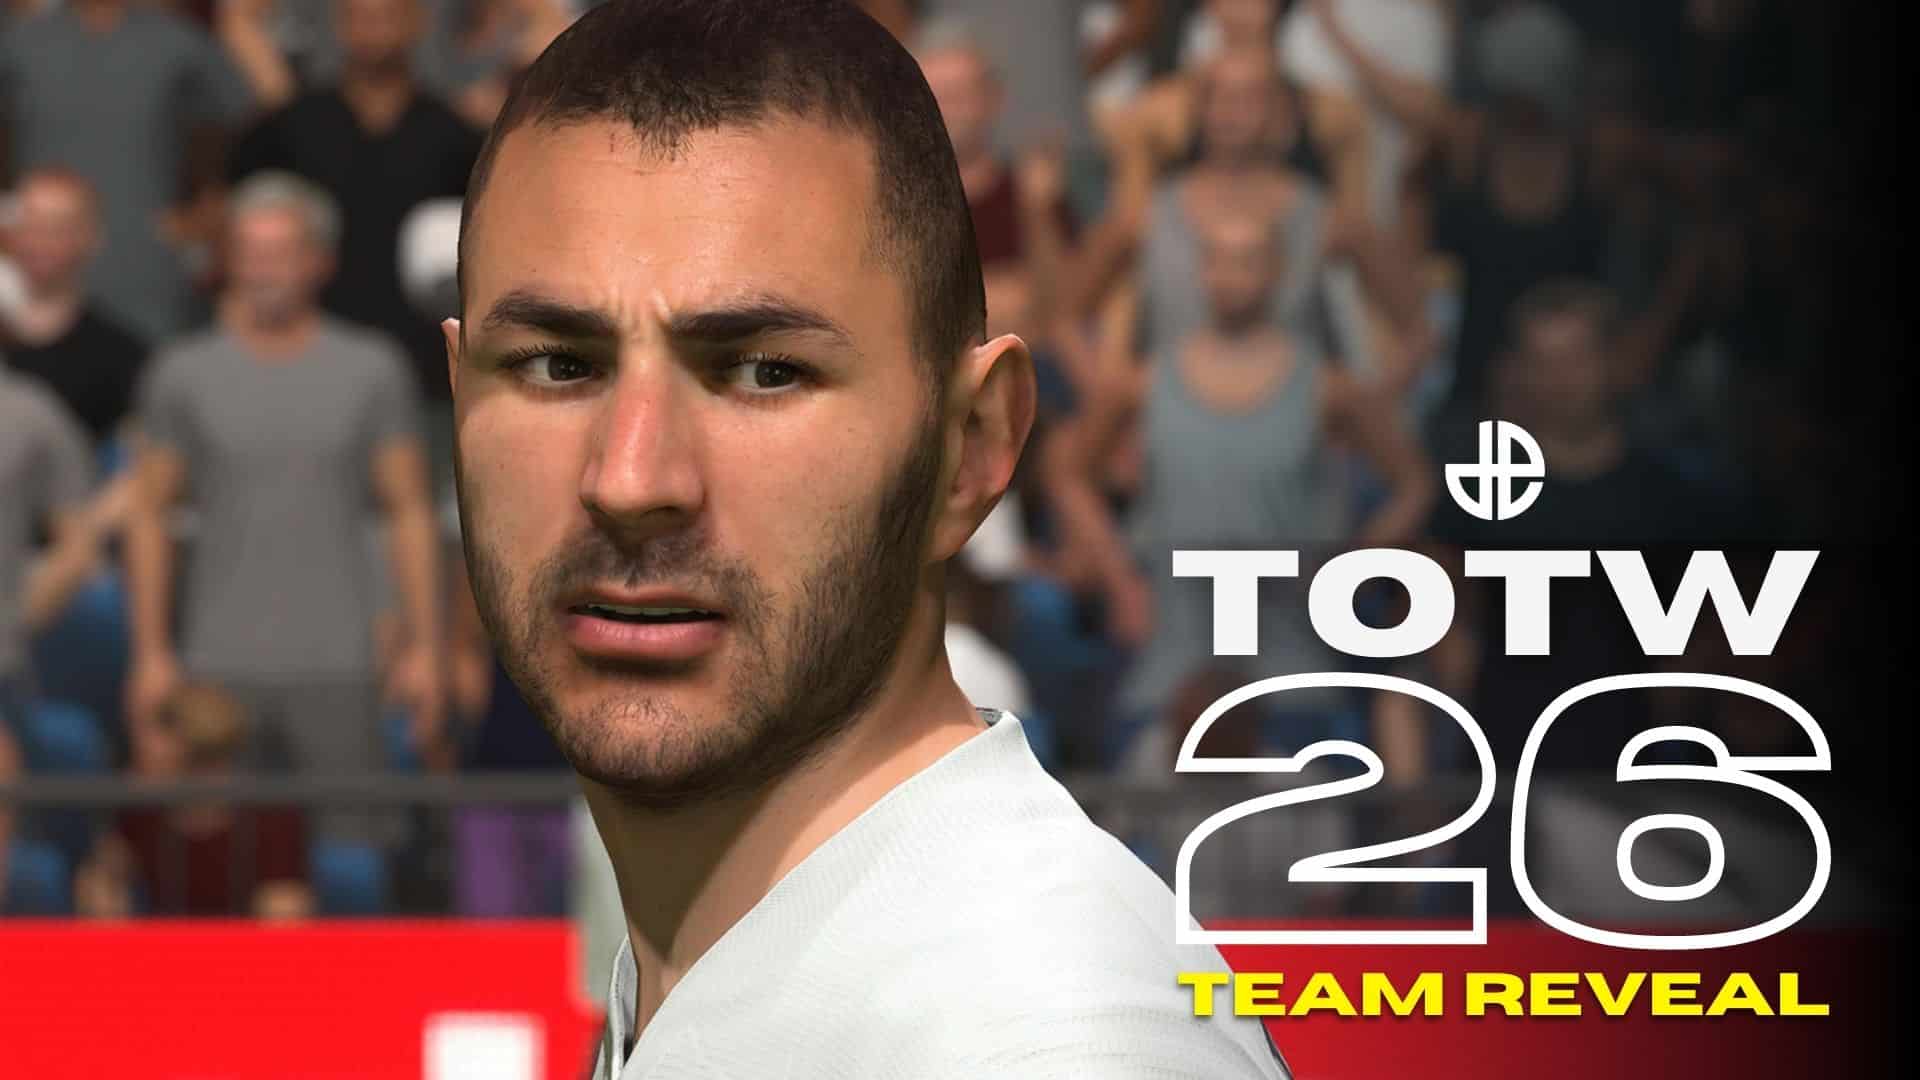 Karim Benzema in the FIFA 21 Team of the Week TOTW 26 FUT lineup revealed.